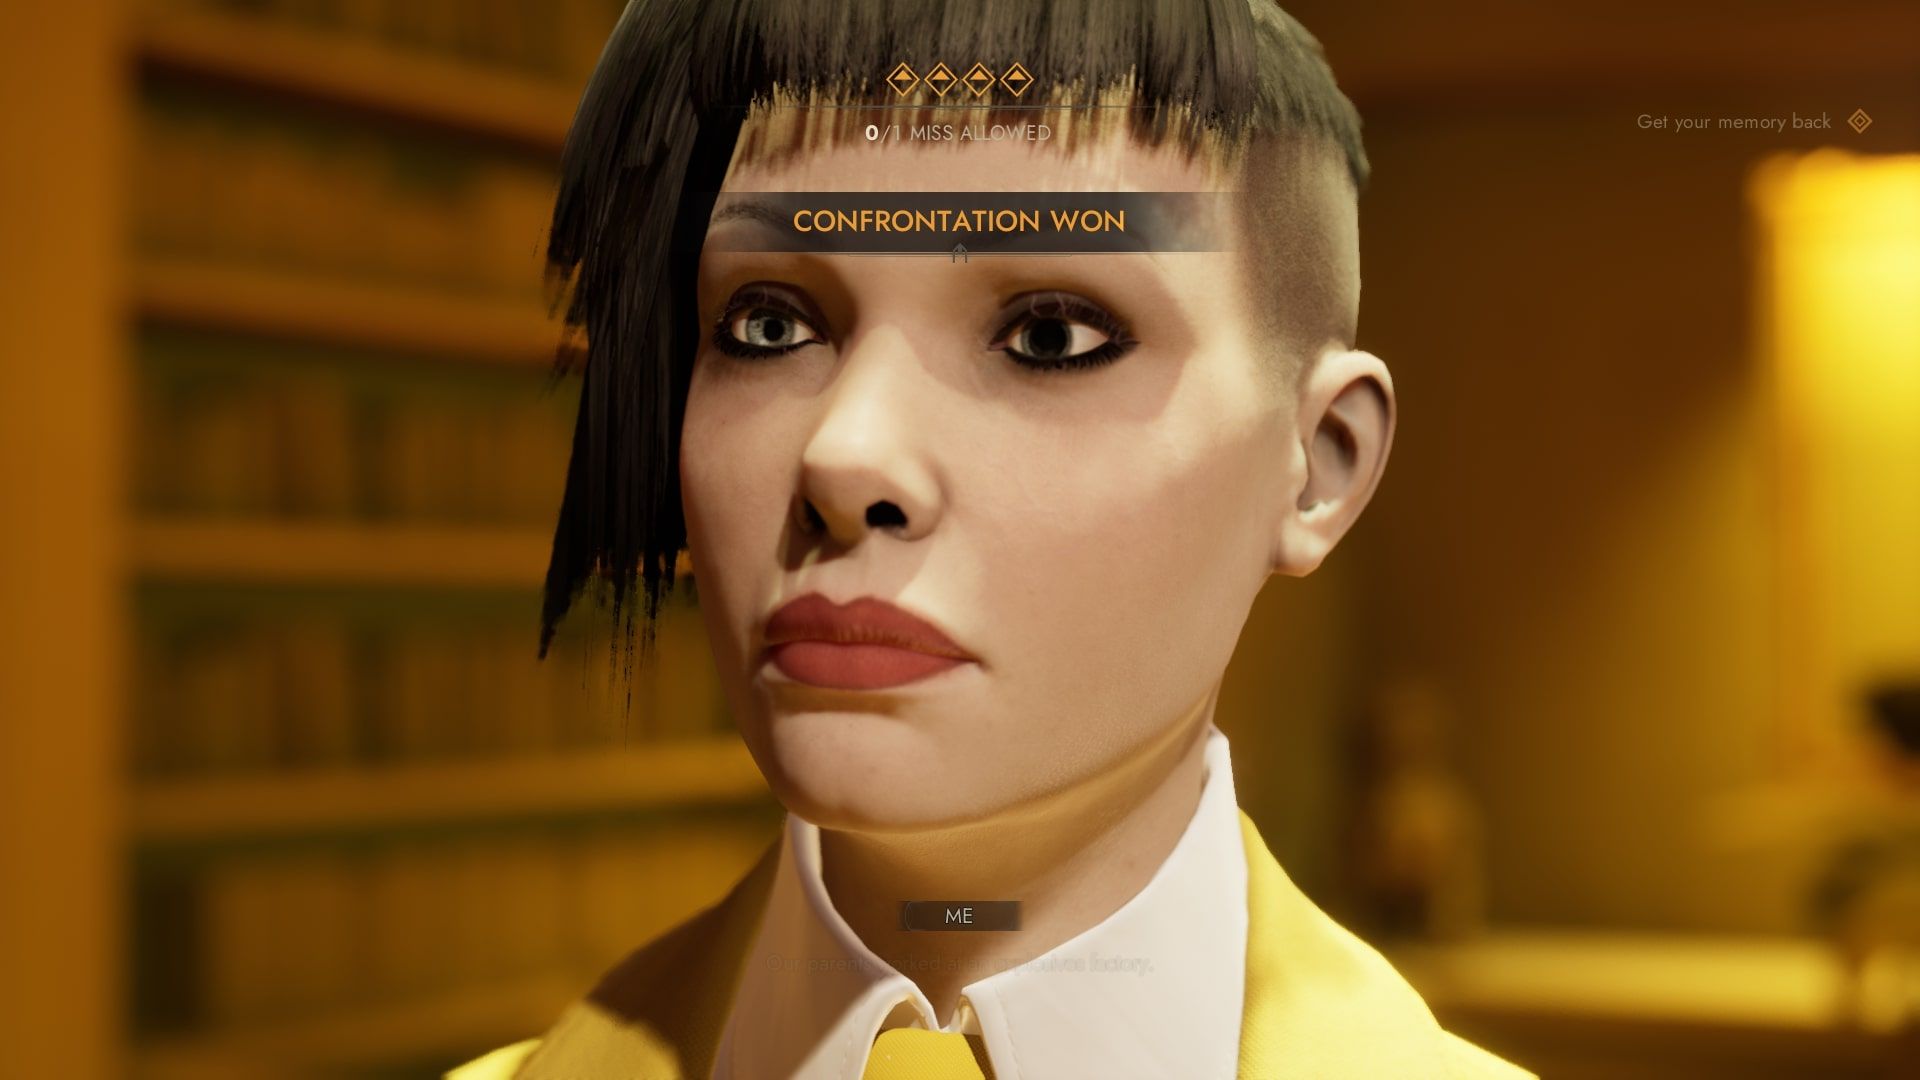 Vampire: The Masquerade - Swansong Leysha having a confrontation with Leysha wearing a yellow suit